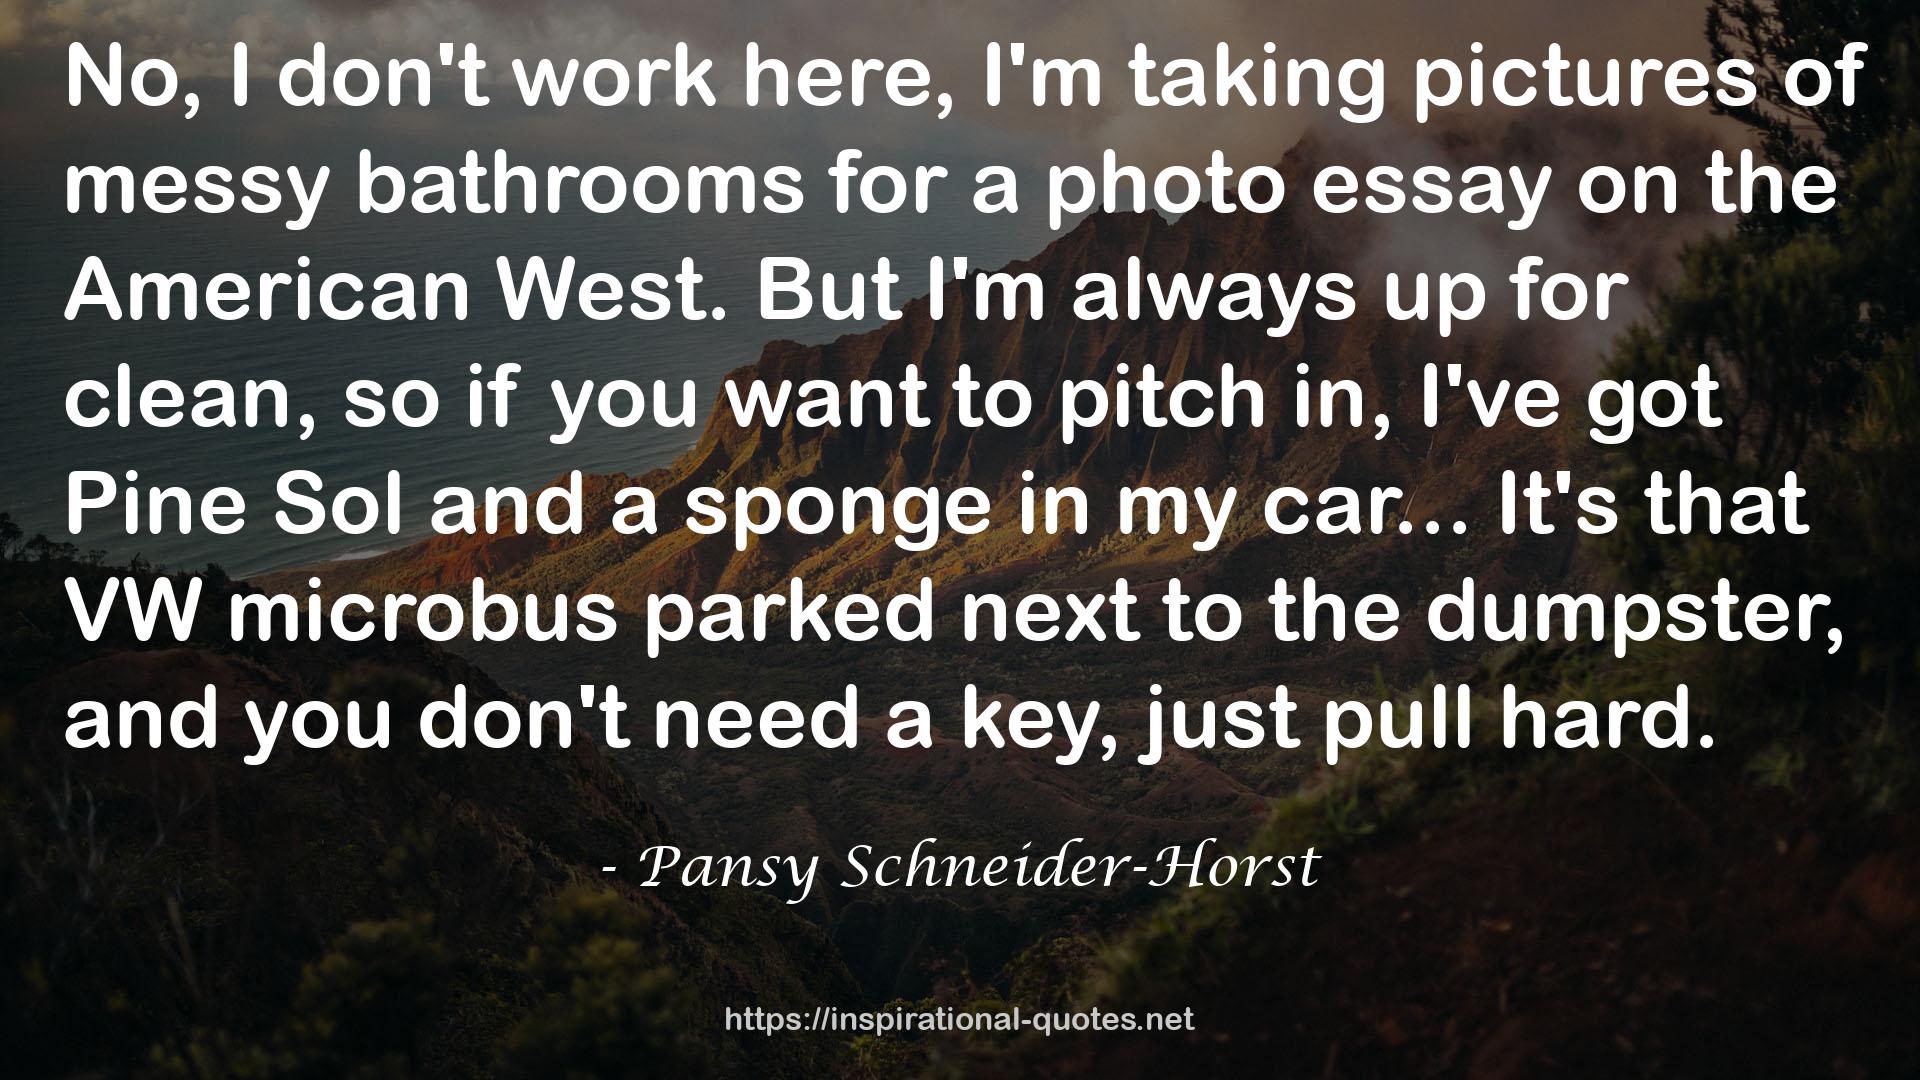 Pansy Schneider-Horst QUOTES